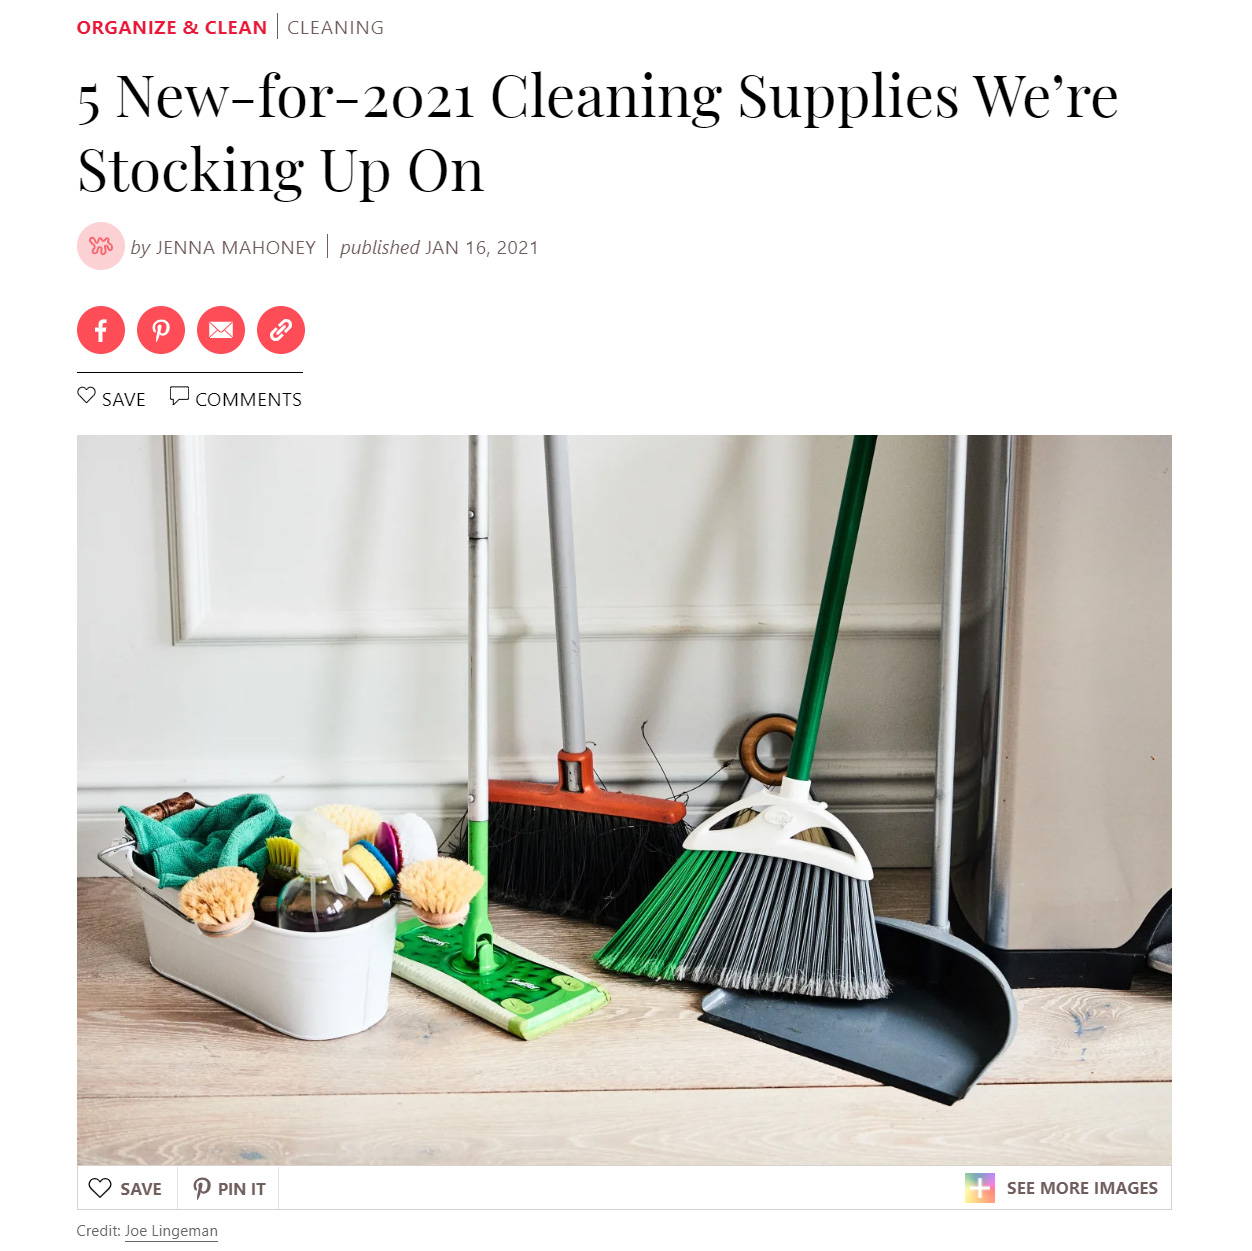 5 New-for-2021 Cleaning Supplies We’re Stocking Up On.  Photo of brooms, sponges, dustpan, and bucket of cleaning items on kitchen floor.